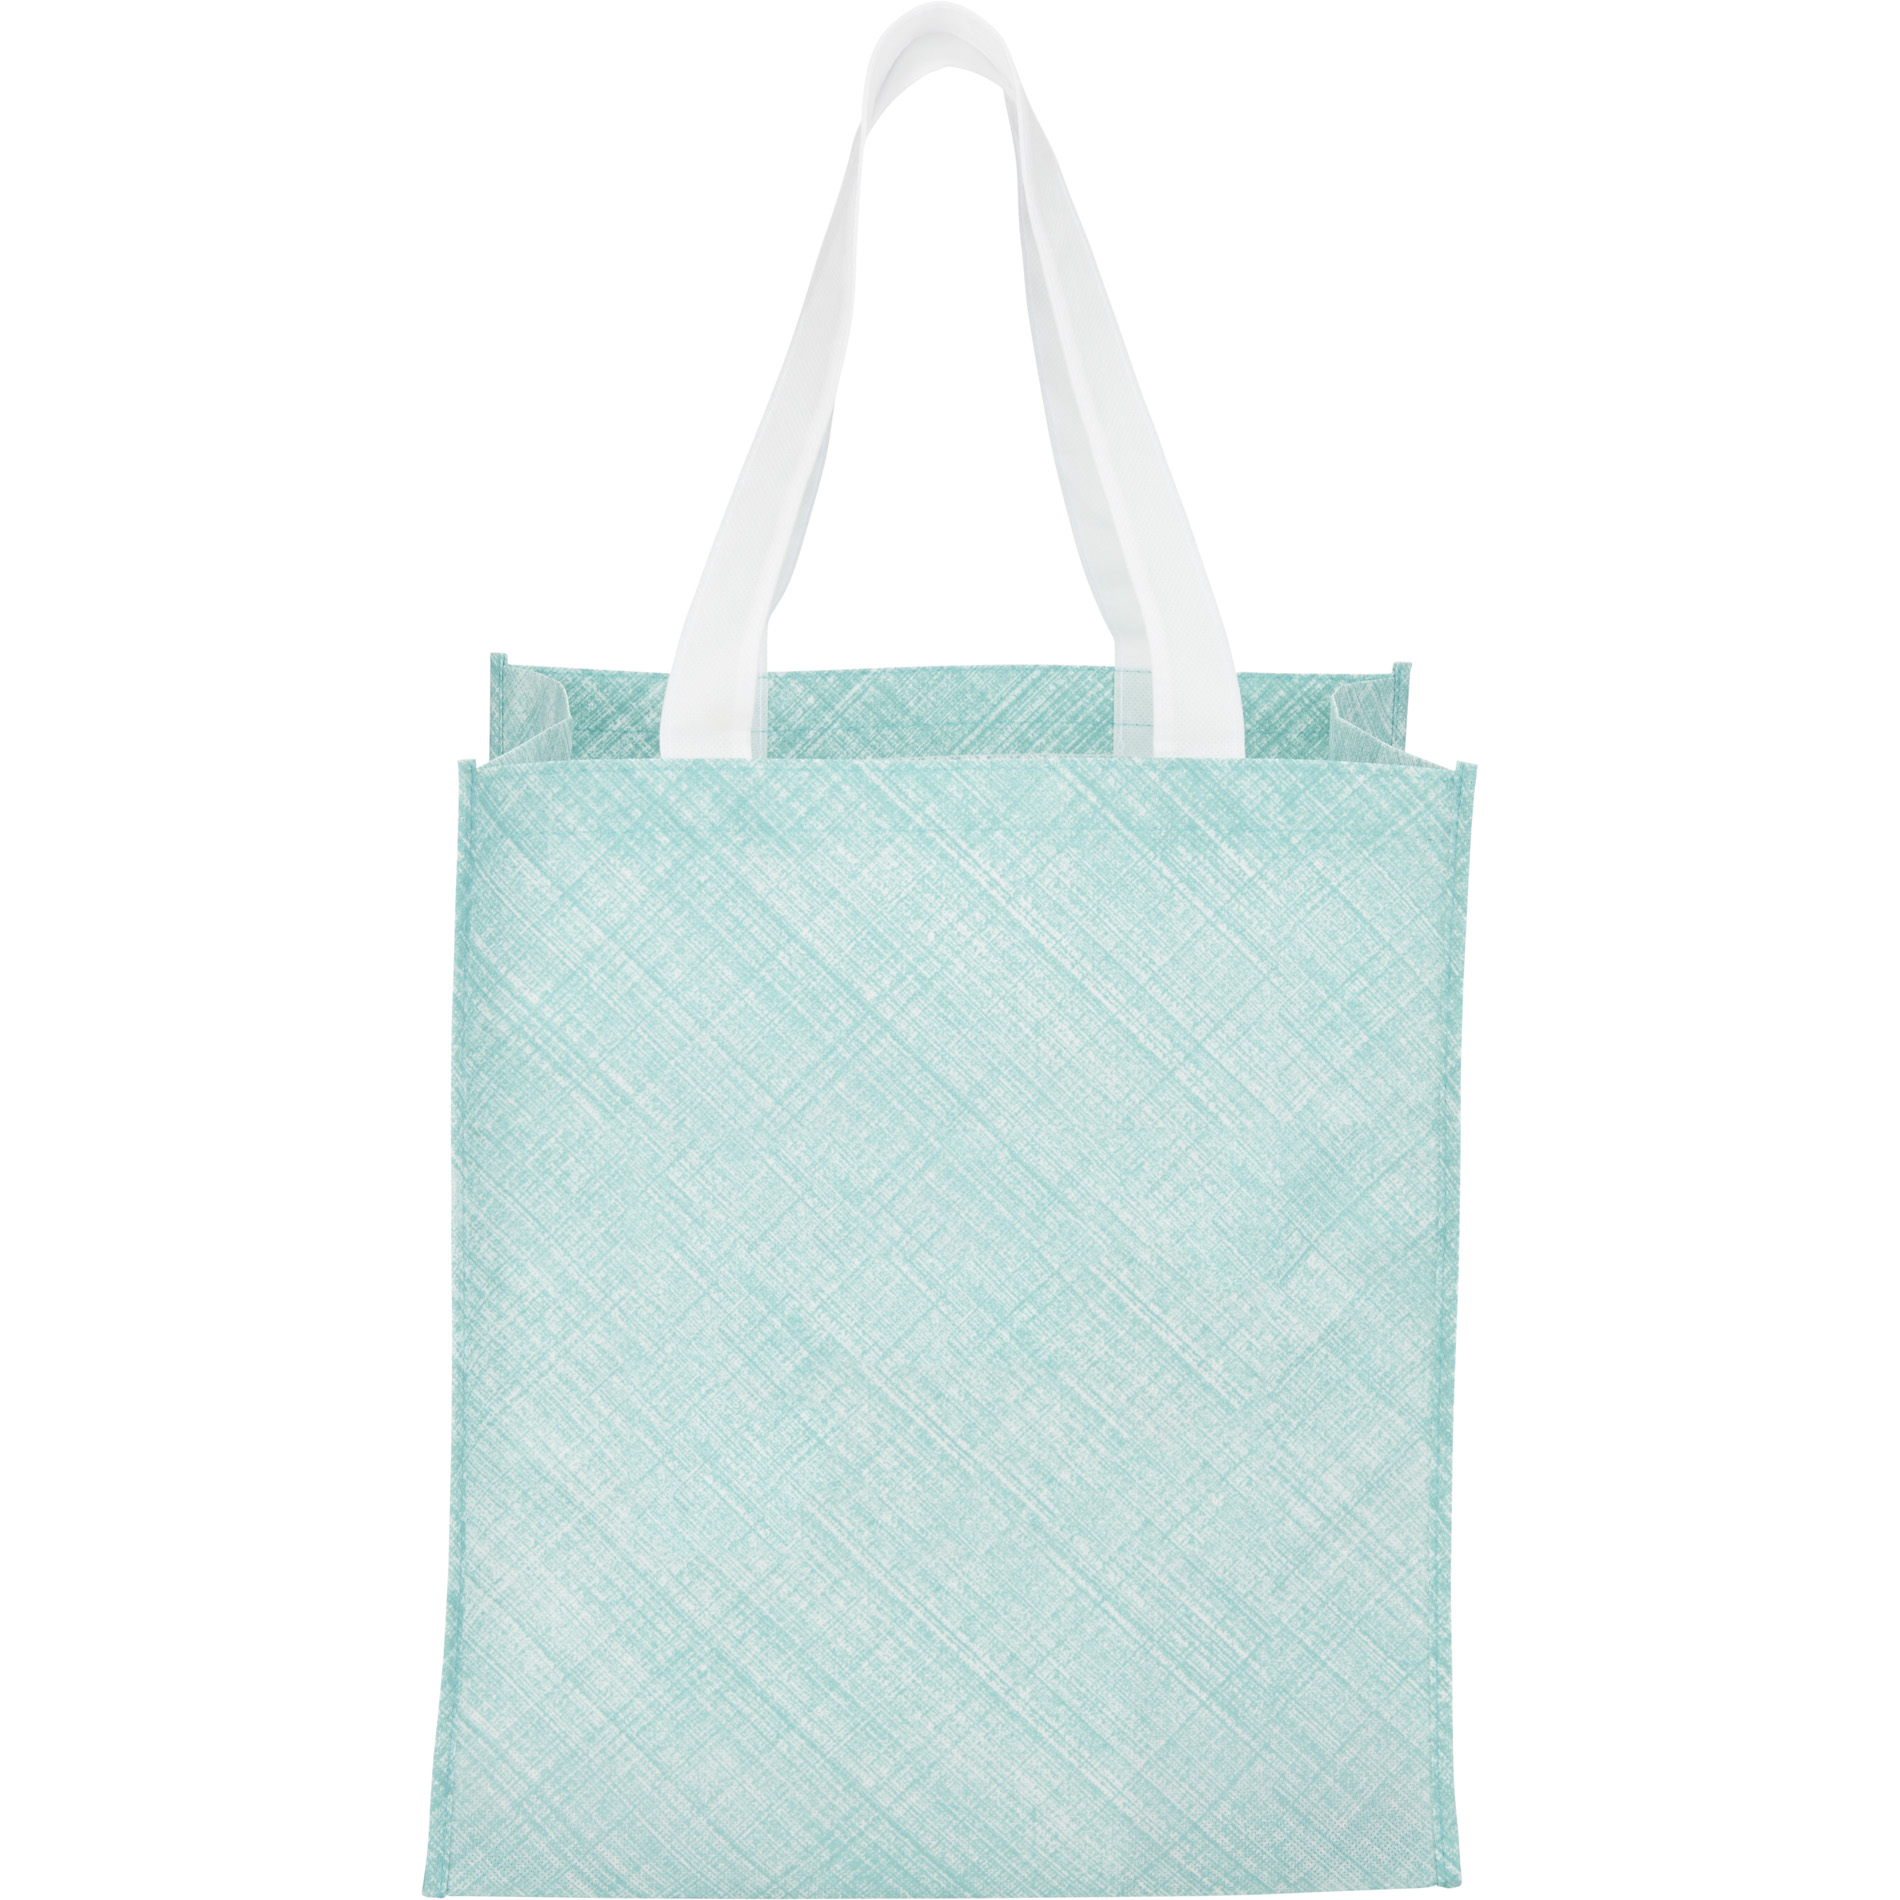 LEEDS 2150-41 - Pastel Non-Woven Big Grocery Tote